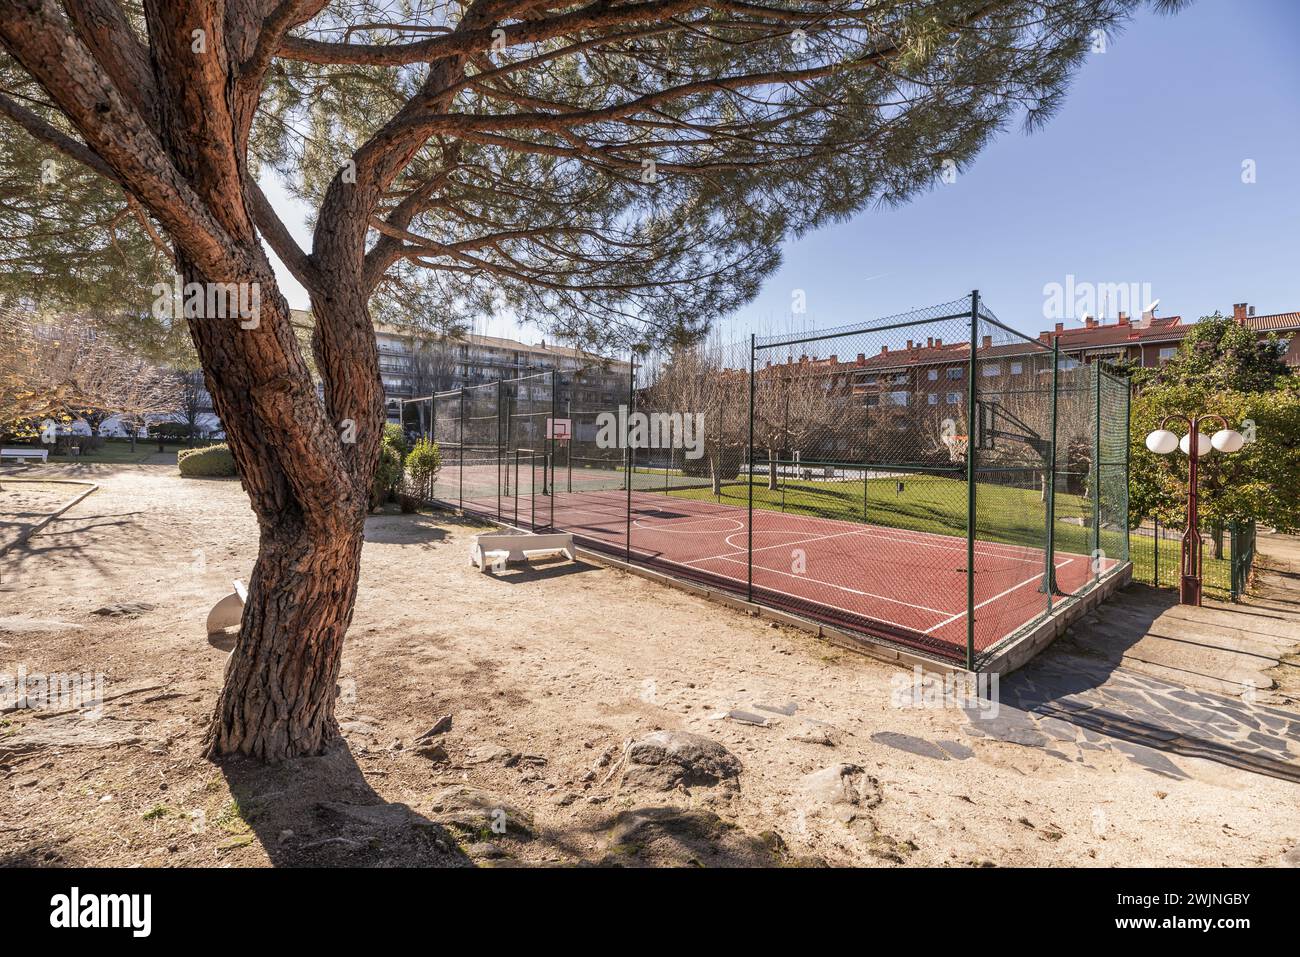 A basketball court with a perimeter metal fence within a plot of common areas in a community Stock Photo